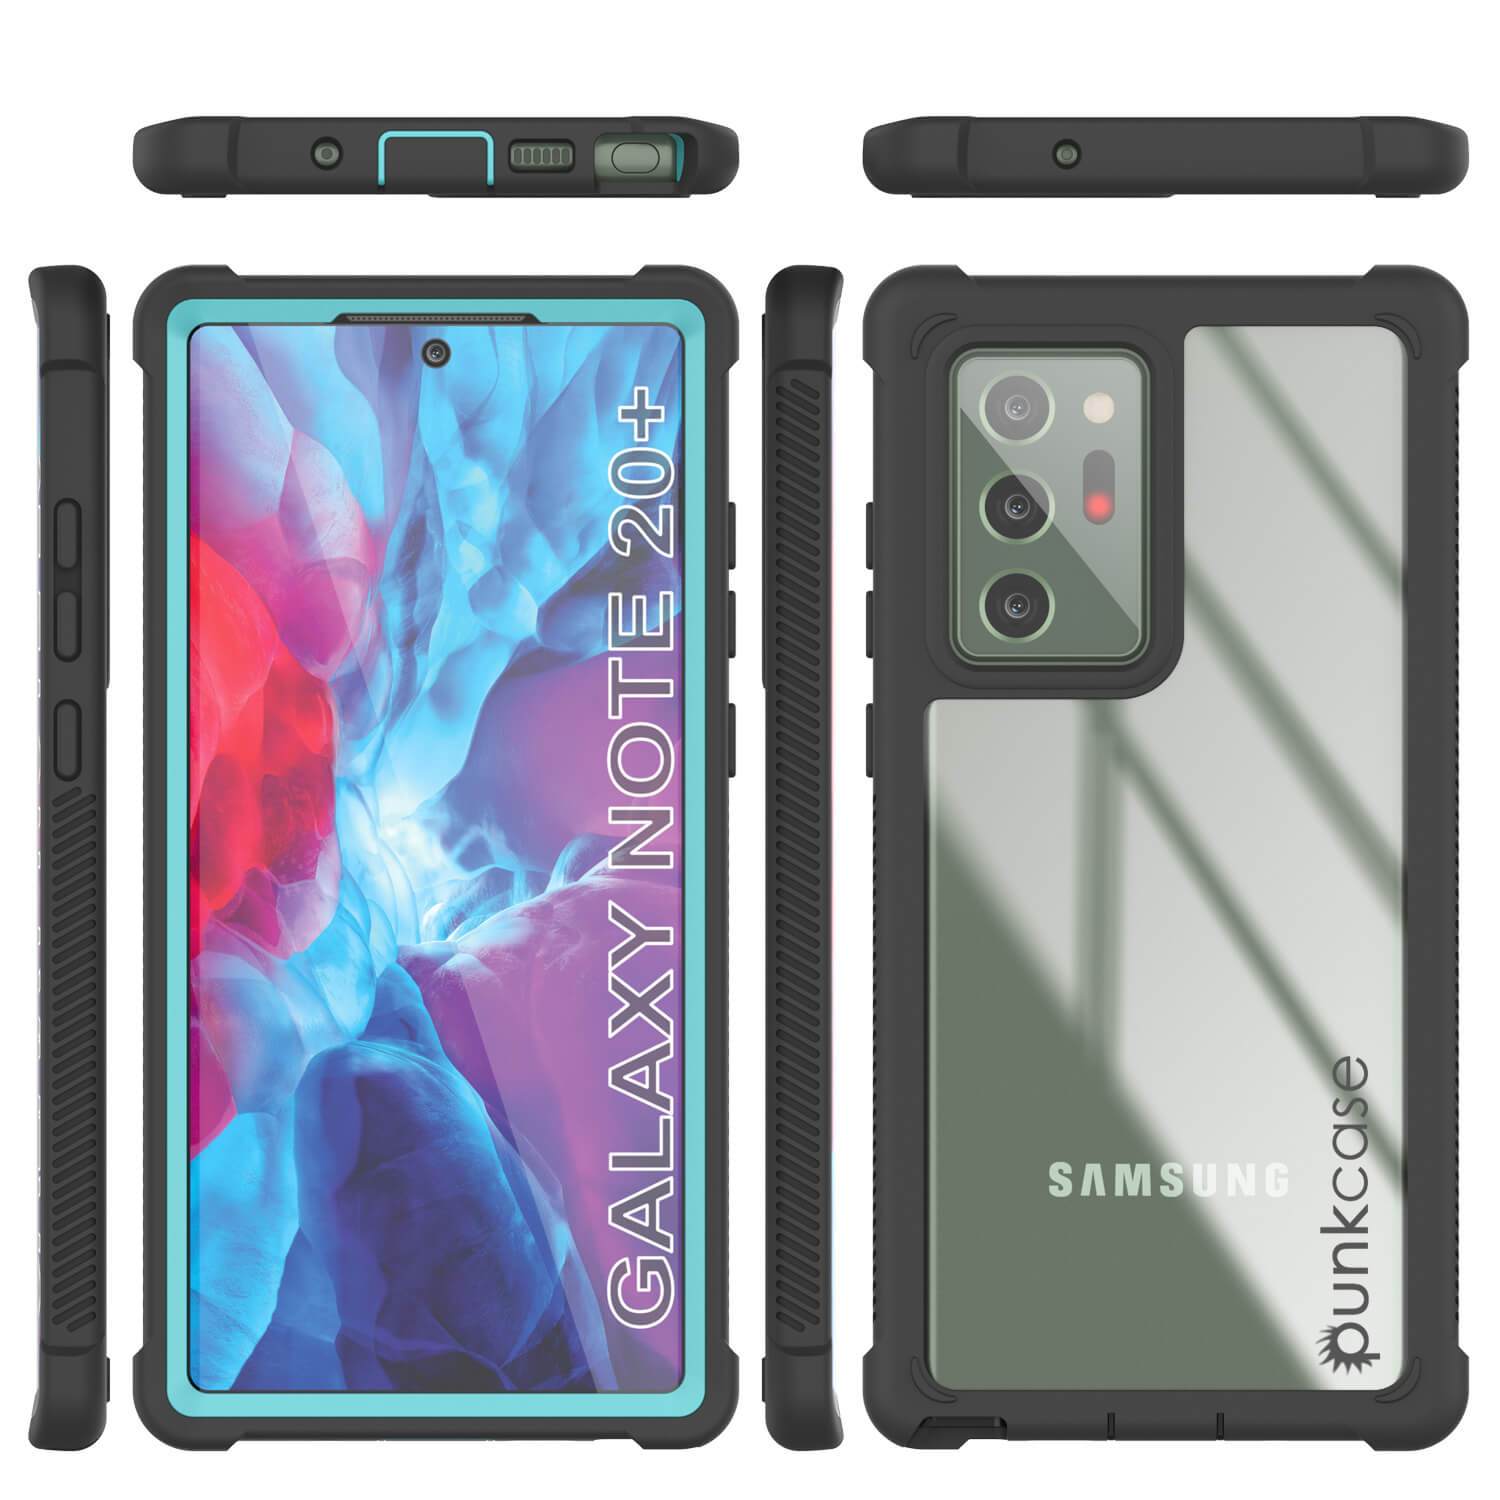 Punkcase Galaxy Note 20 Ultra Case, [Spartan Series] Teal Rugged Heavy Duty Cover W/Built in Screen Protector